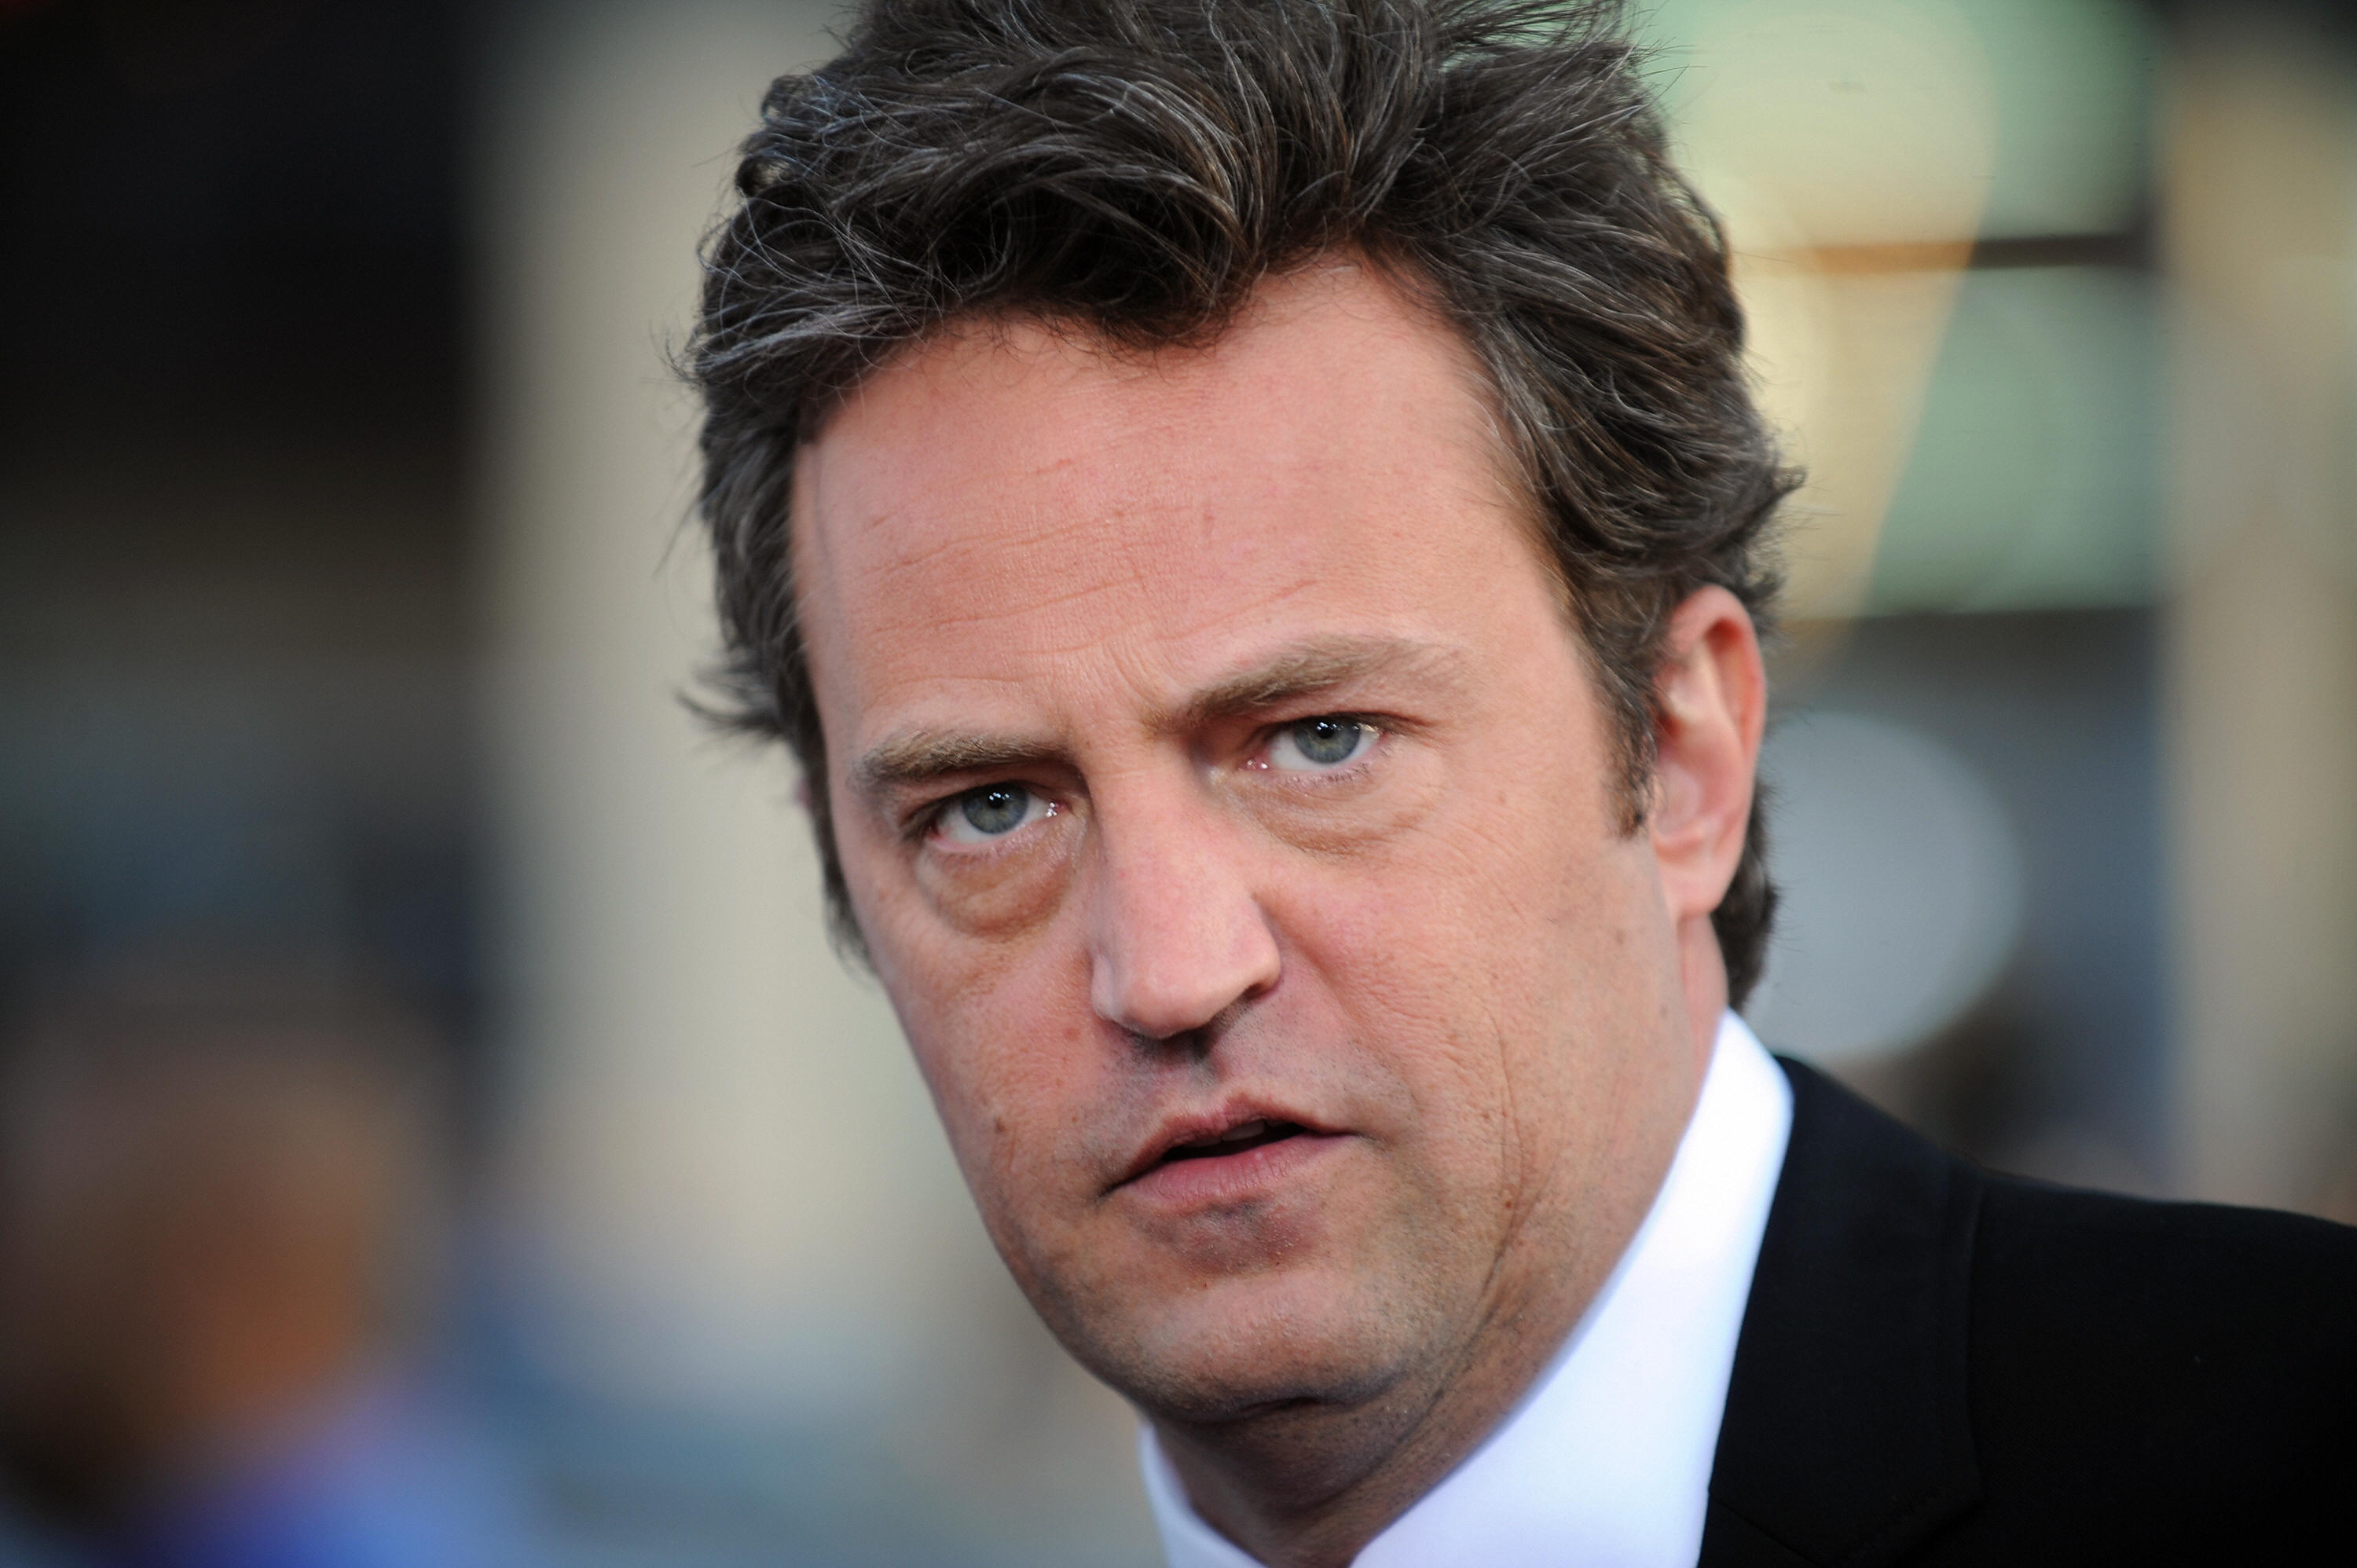 Matthew Perry in Hollywood, California, April 14, 2009. | Source: Getty Images